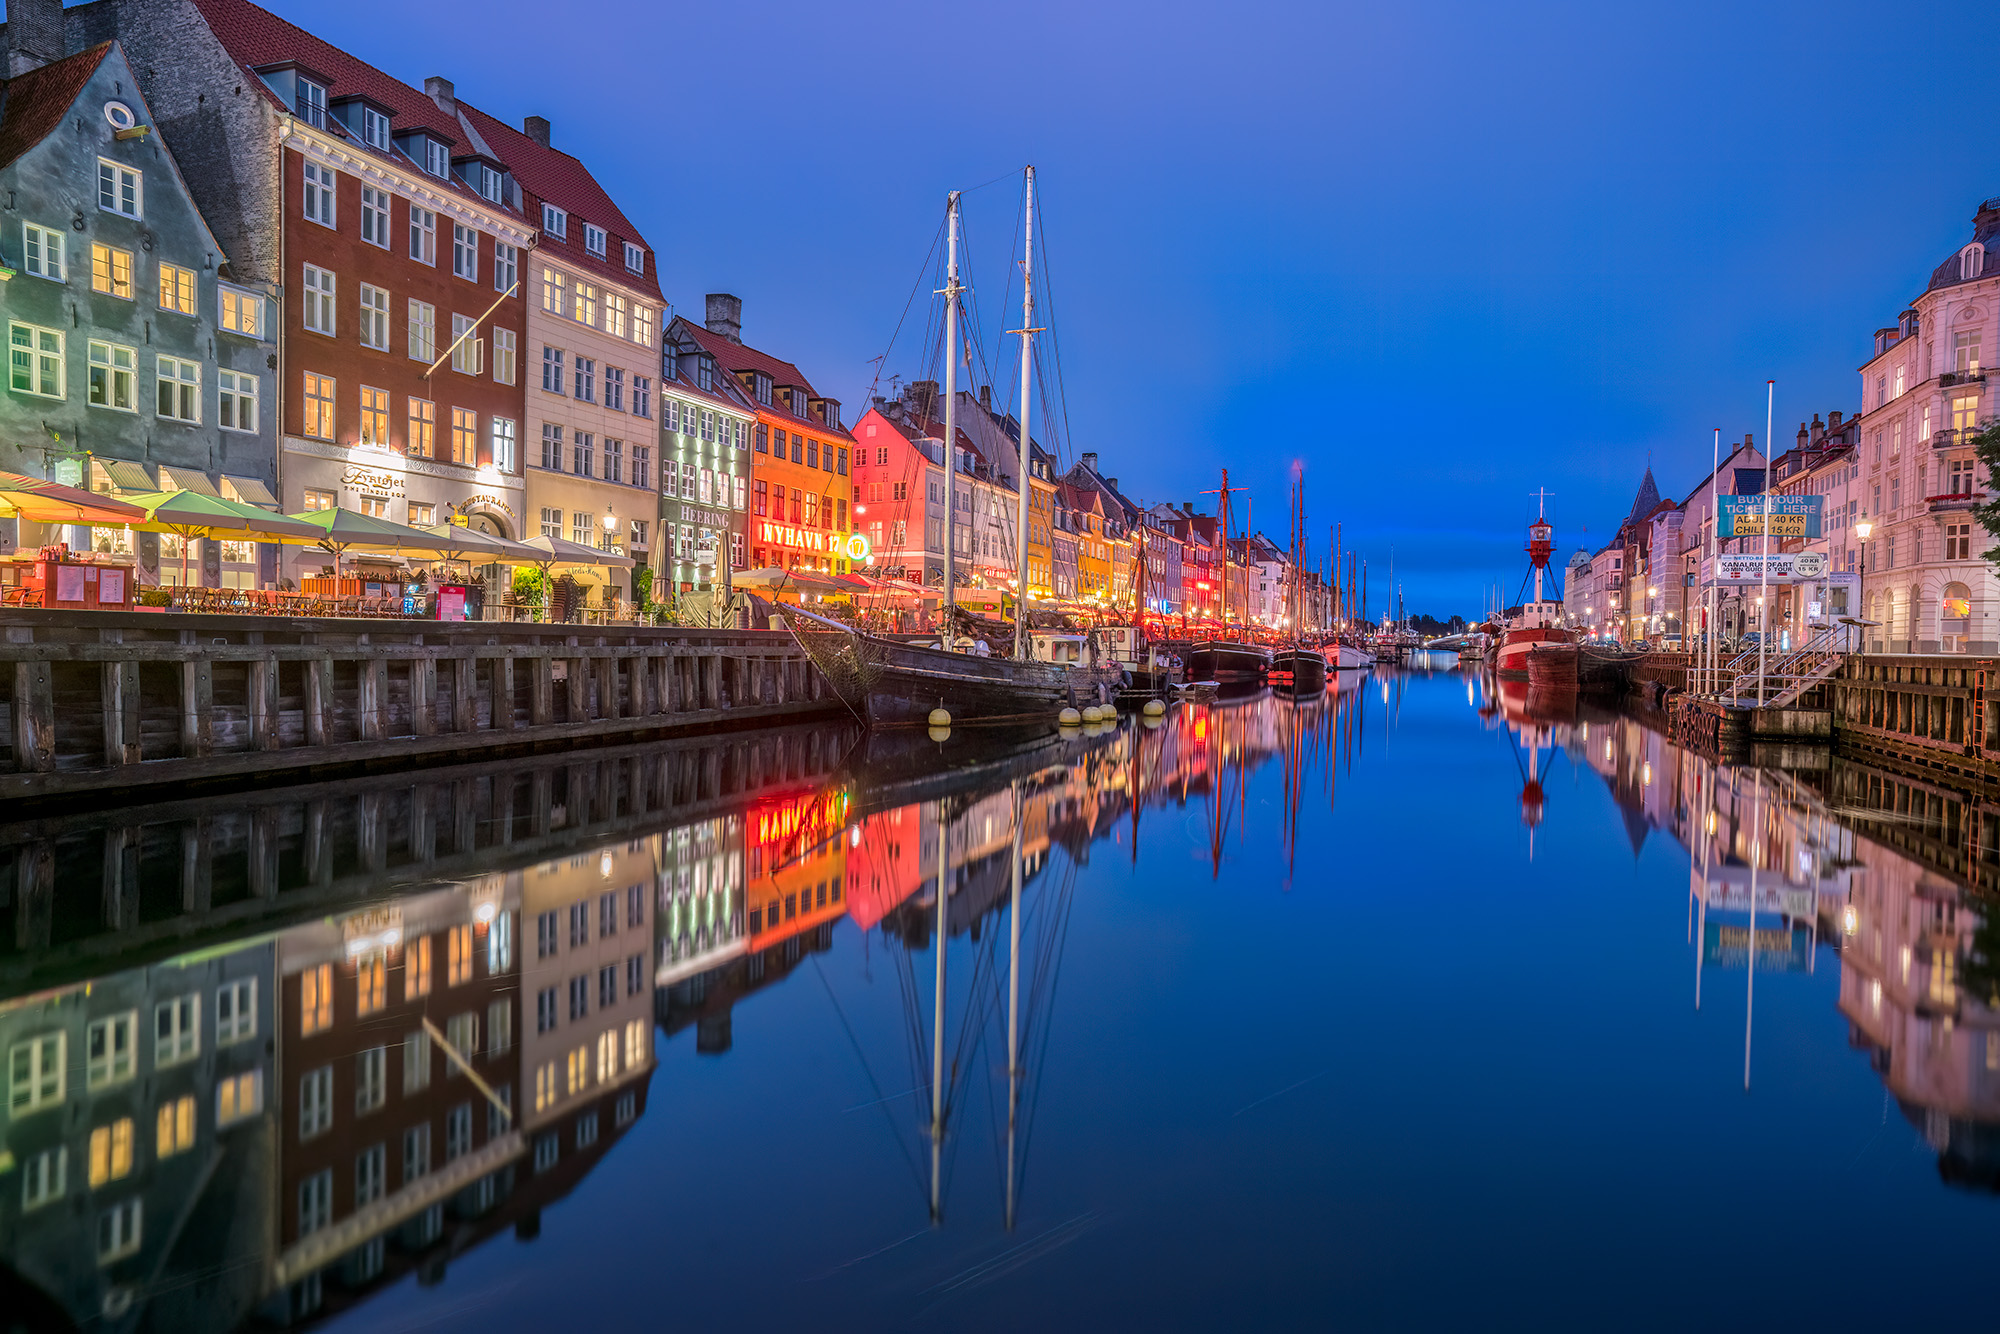 During blue hour in the Nyhavn area of Copenhagen, Denmark, I was captivated by the vibrant display of colors and reflections...